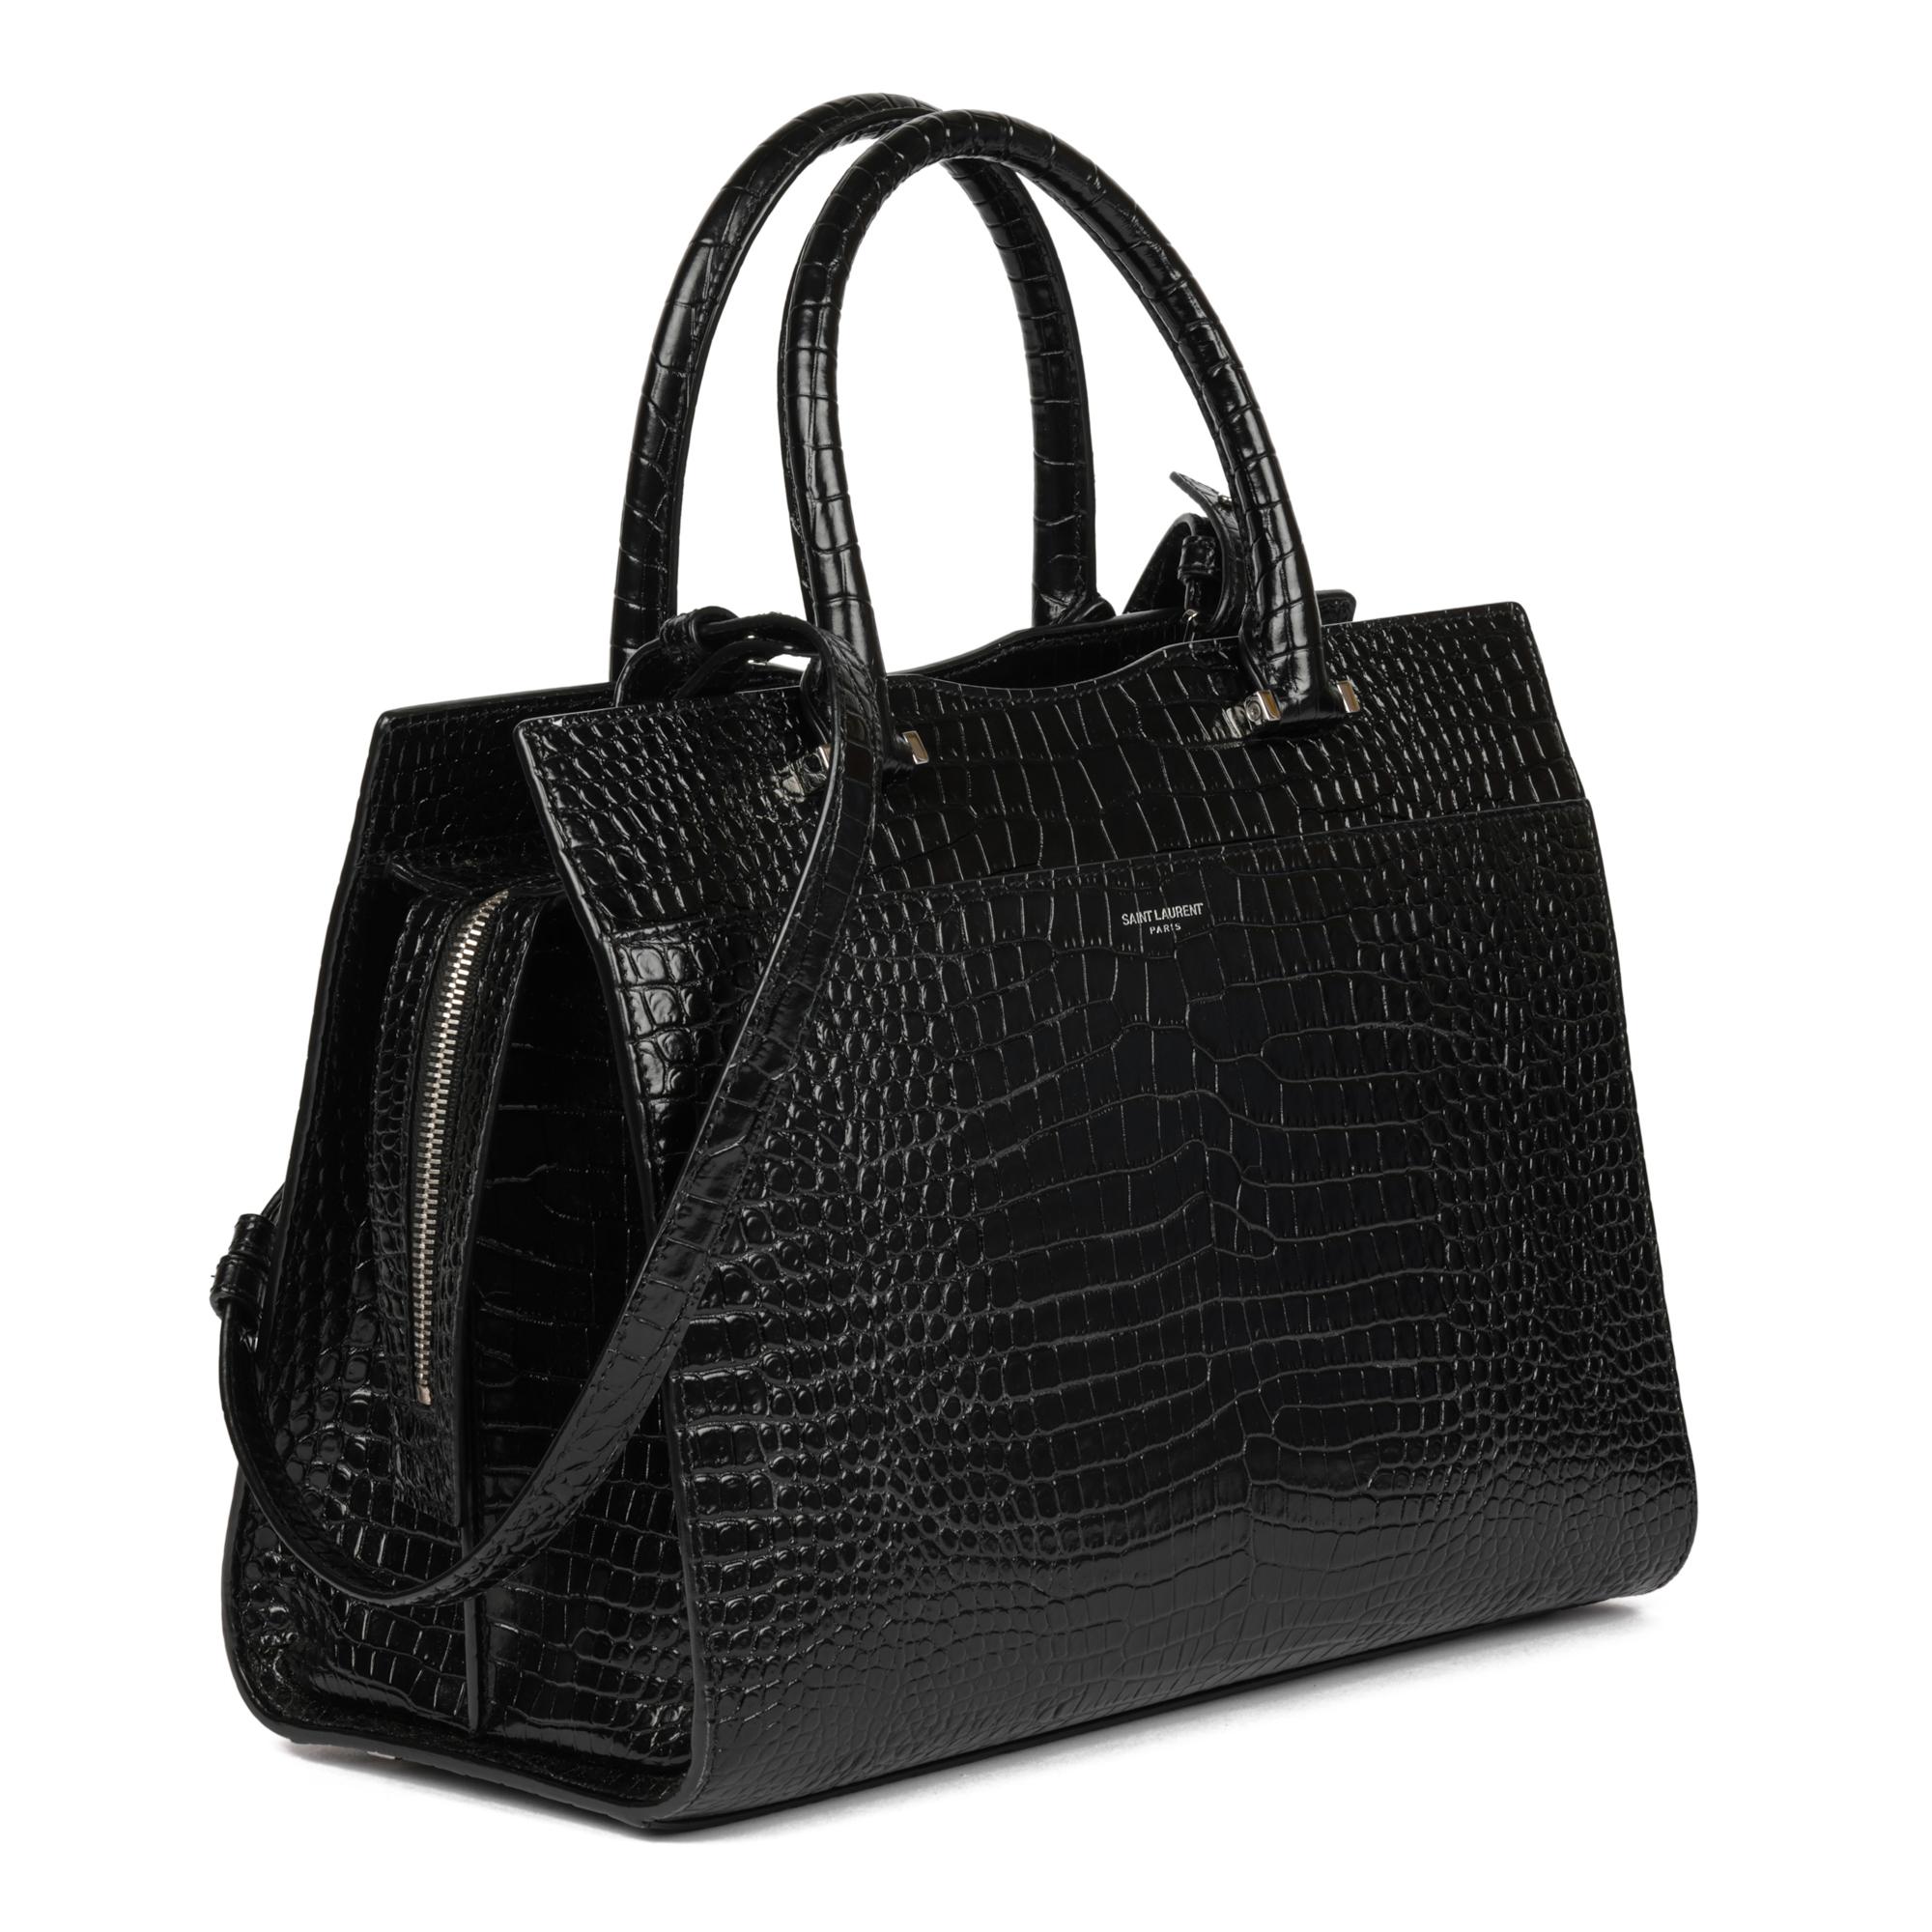 SAINT LAURENT
Black Faux Crocodile-Embossed Leather Small Uptown Bag

Xupes Reference: CB887
Serial Number: MAL557655.0319
Age (Circa): 2019
Accompanied By: Saint Laurent Dust Bag, Care Booklet, Authenticity Card
Authenticity Details: Date Stamp